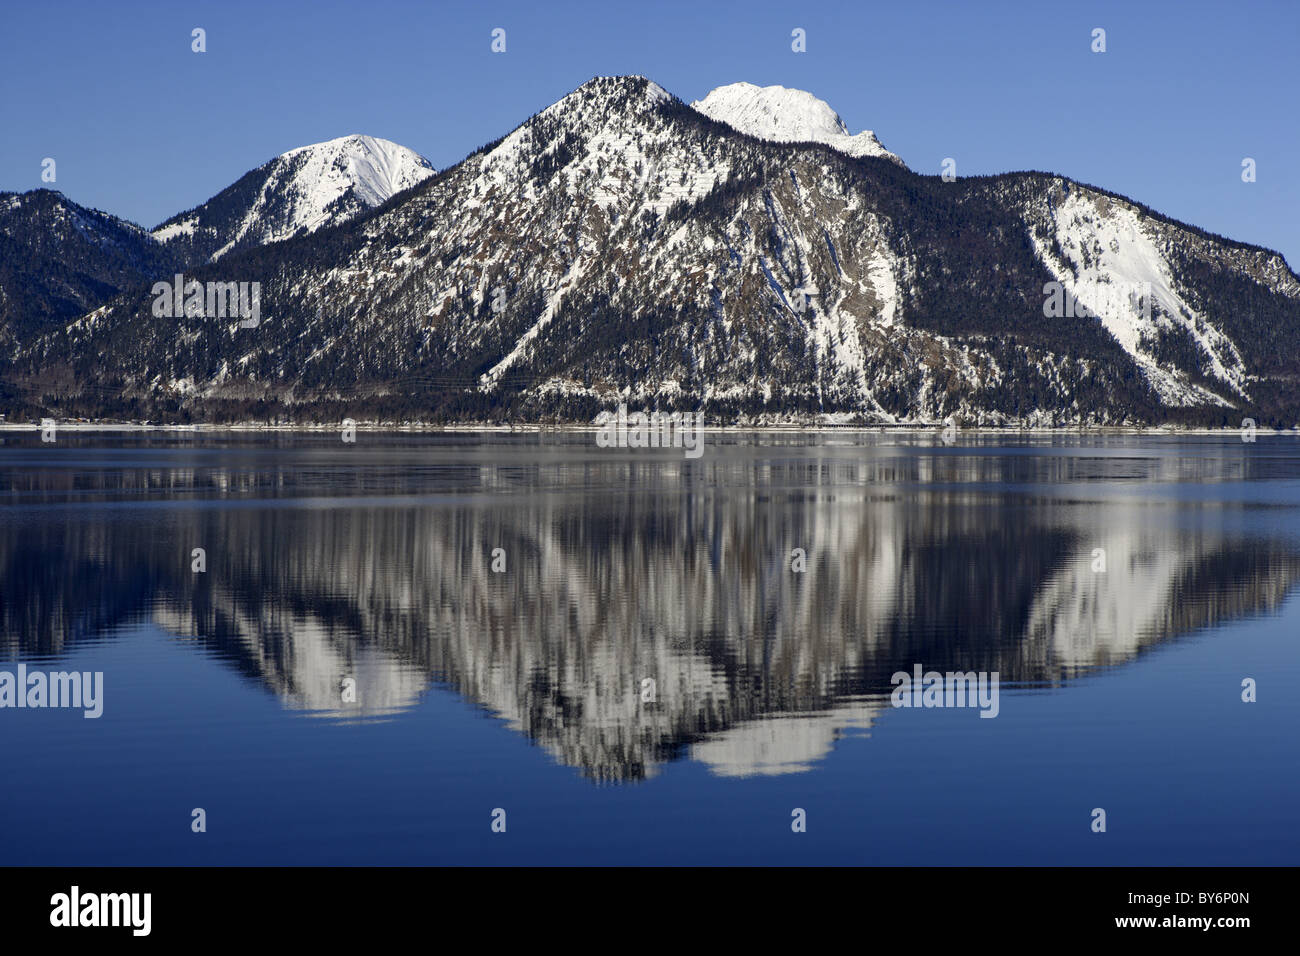 Walchensee and Jochberg with reflection of the mountain in the lake, Upper Bavaria, Bavaria, Germany Stock Photo